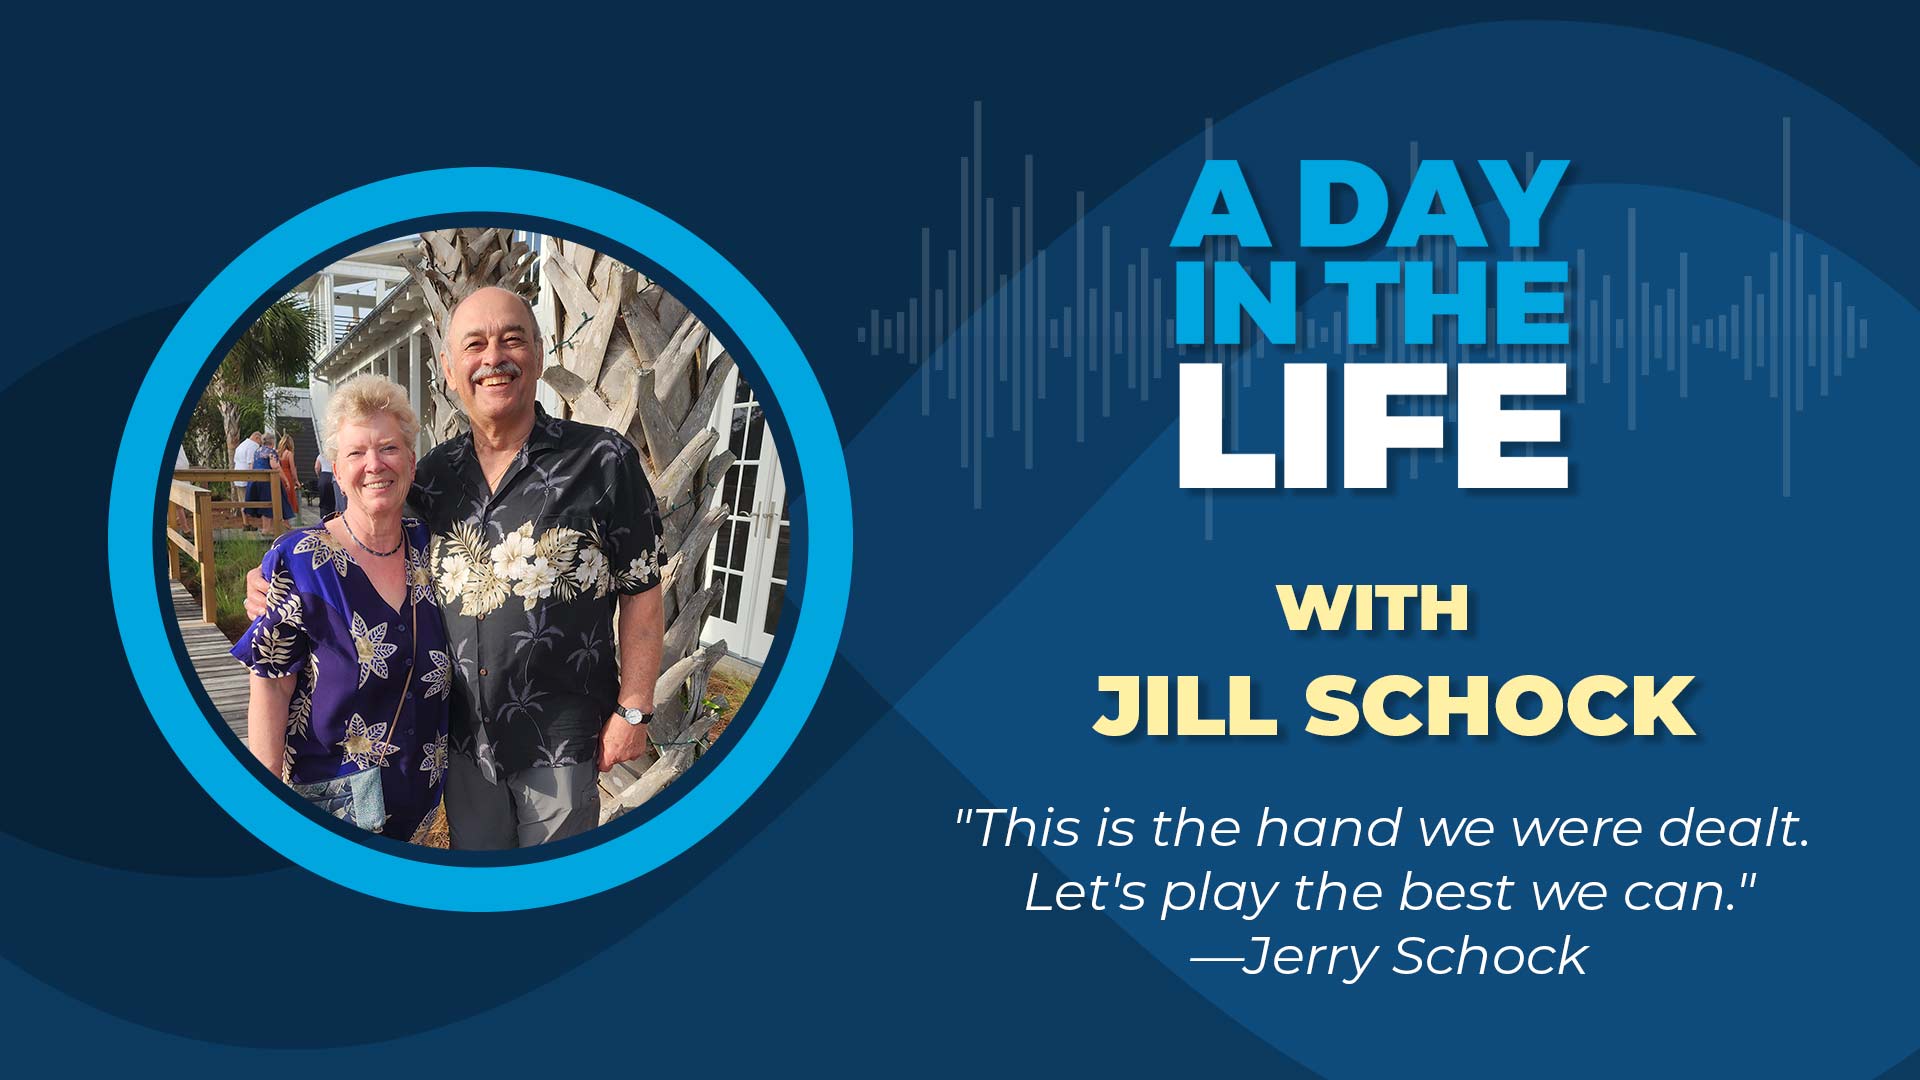 Jill Schock and her husband and myeloma patient Jerry Schock